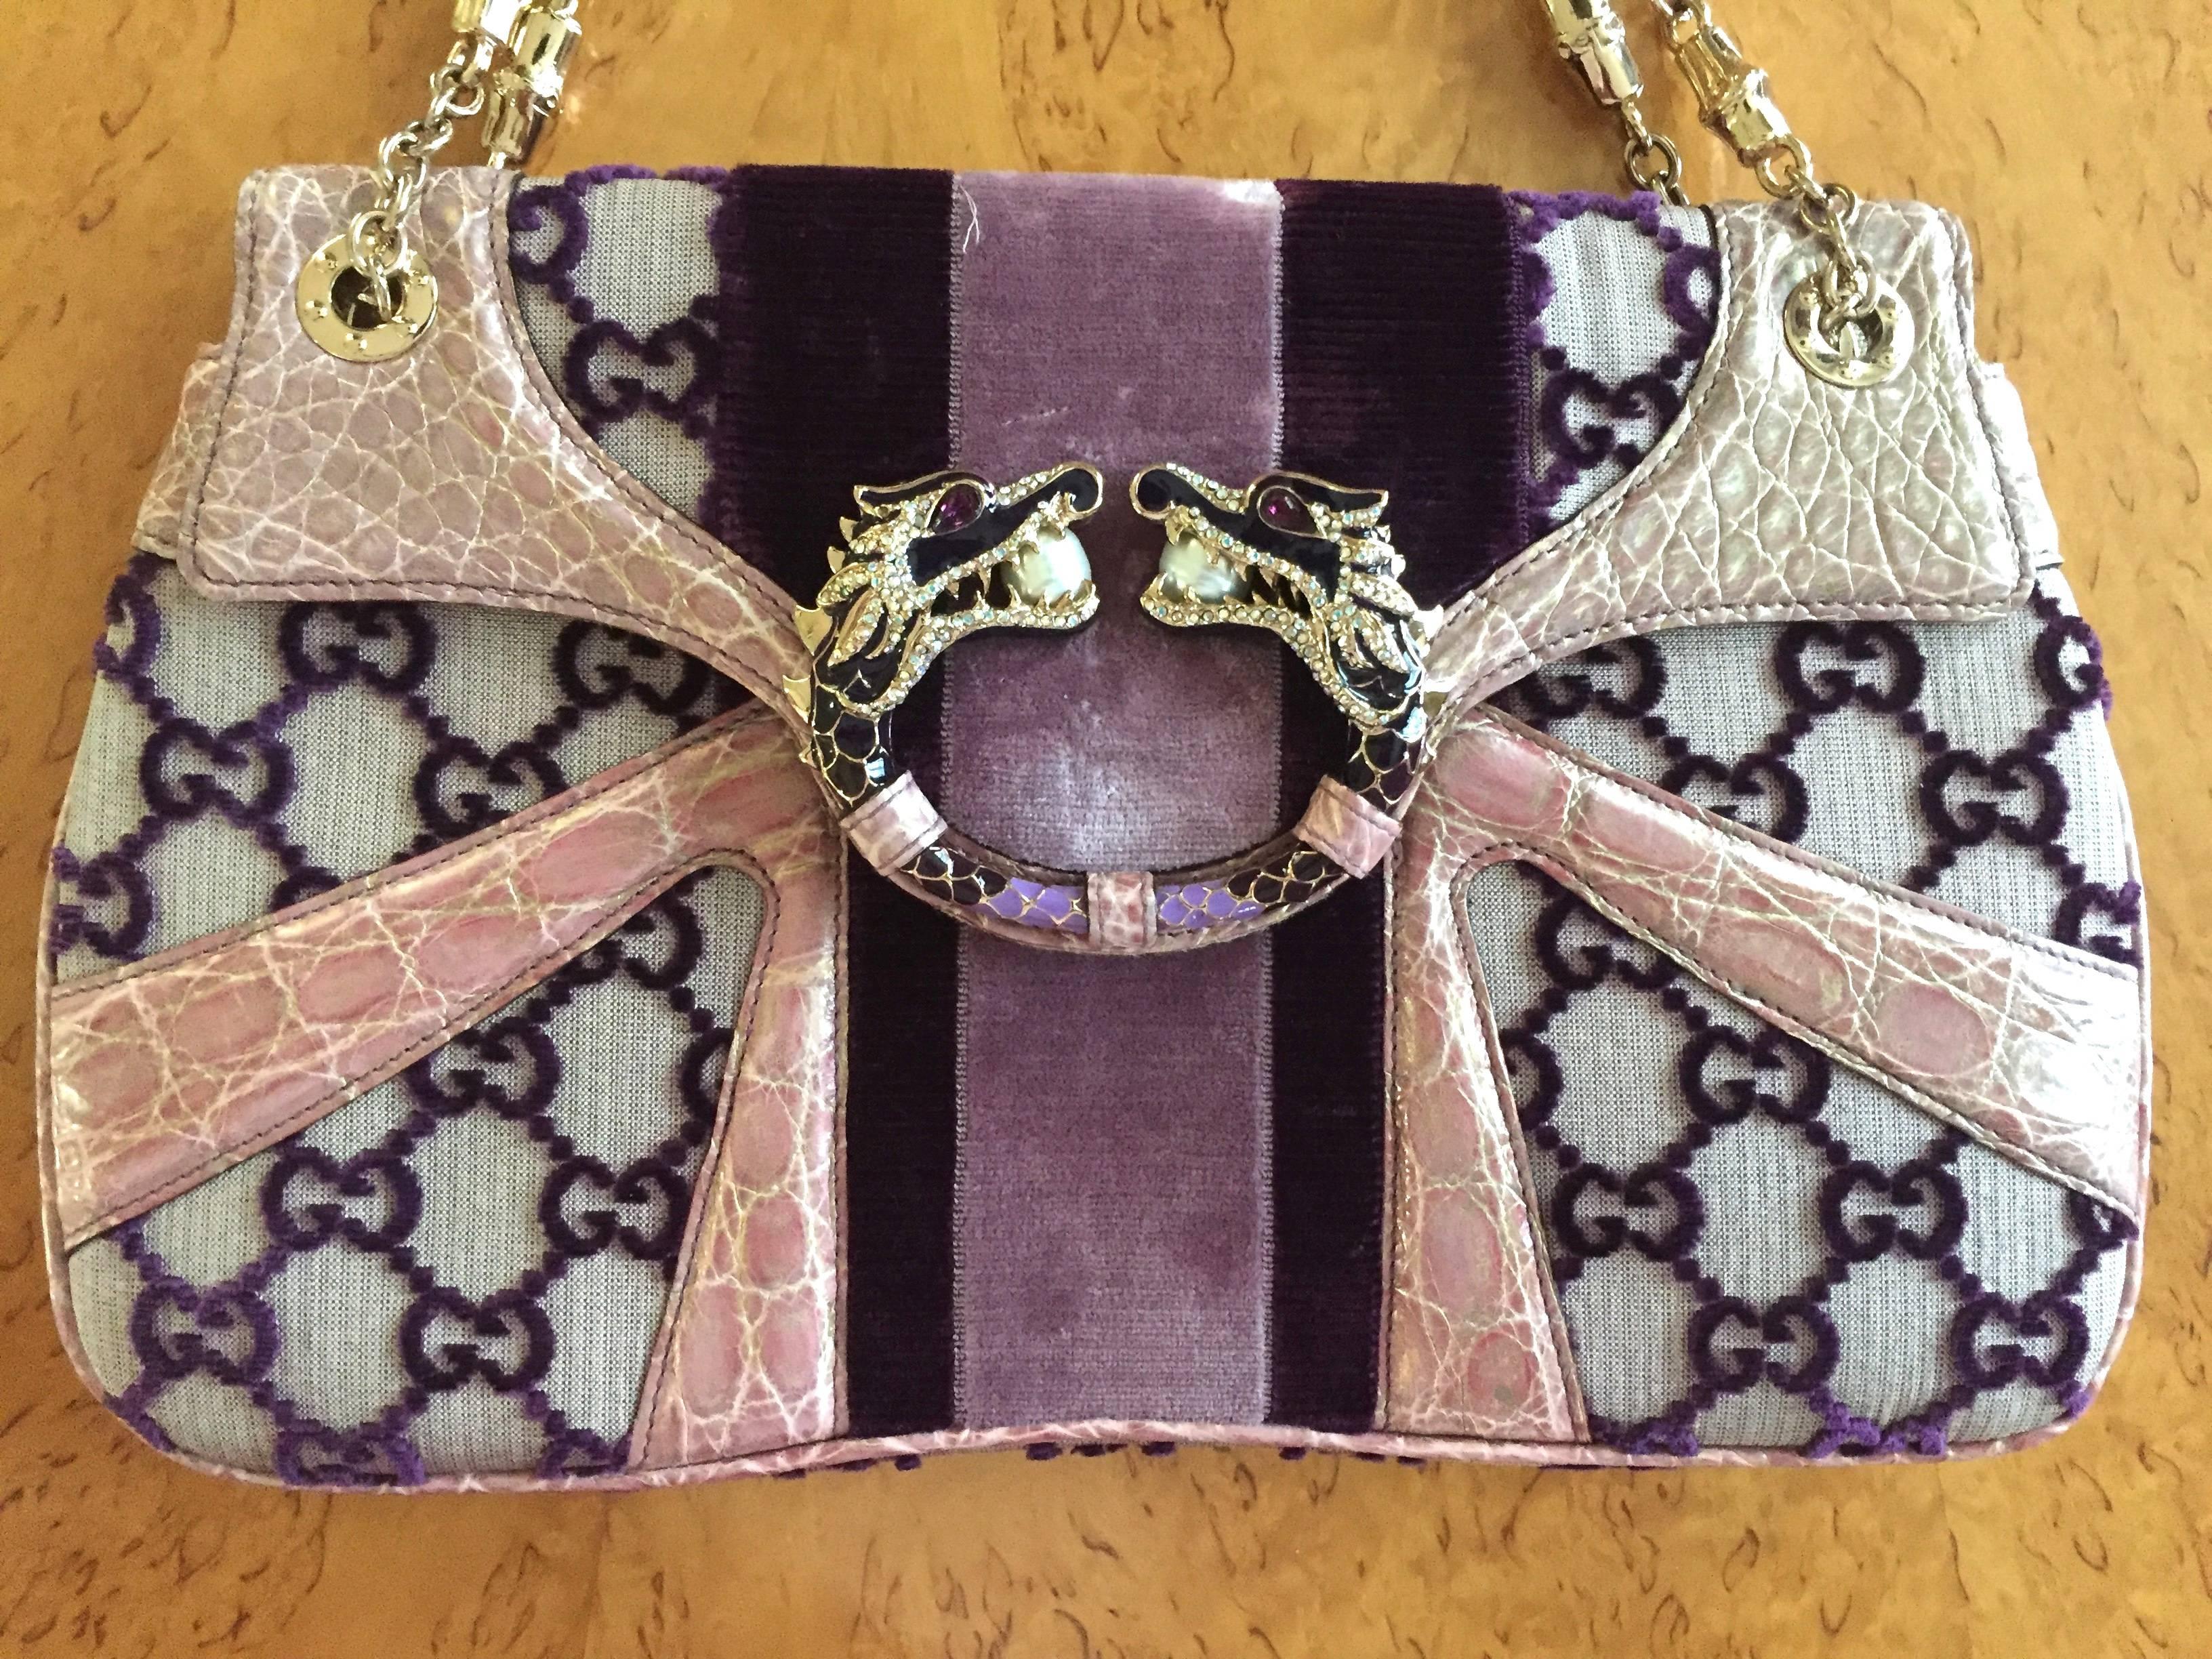 Gucci by Tom Ford Crocodile Dragon Bag
2002
This is an authentic GUCCI Monogram Tom Ford Crocodile Jeweled Dragon Flap Bag in Purple. This chic tote is finely crafted of a unique purple velvet GG monogram on canvas. There is a web detailing of two